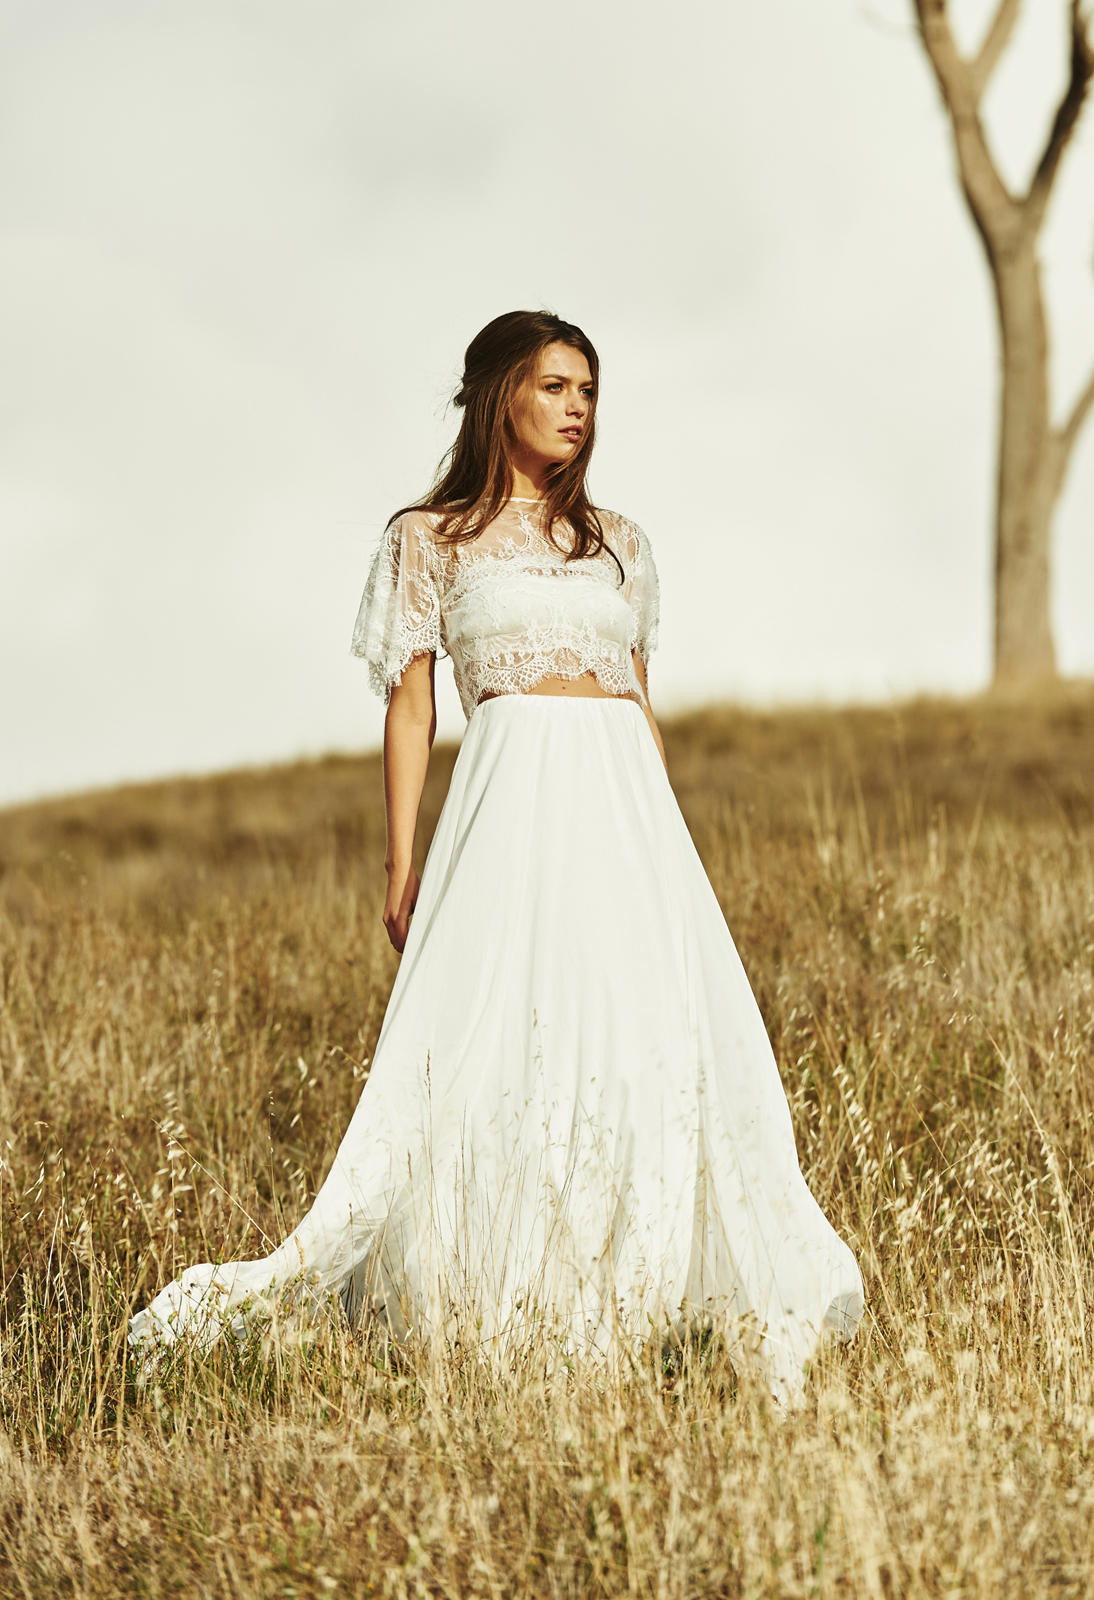 Country Chic Wedding Dresses
 Grace Loves Lace Wedding Dresses Rustic Wedding Chic